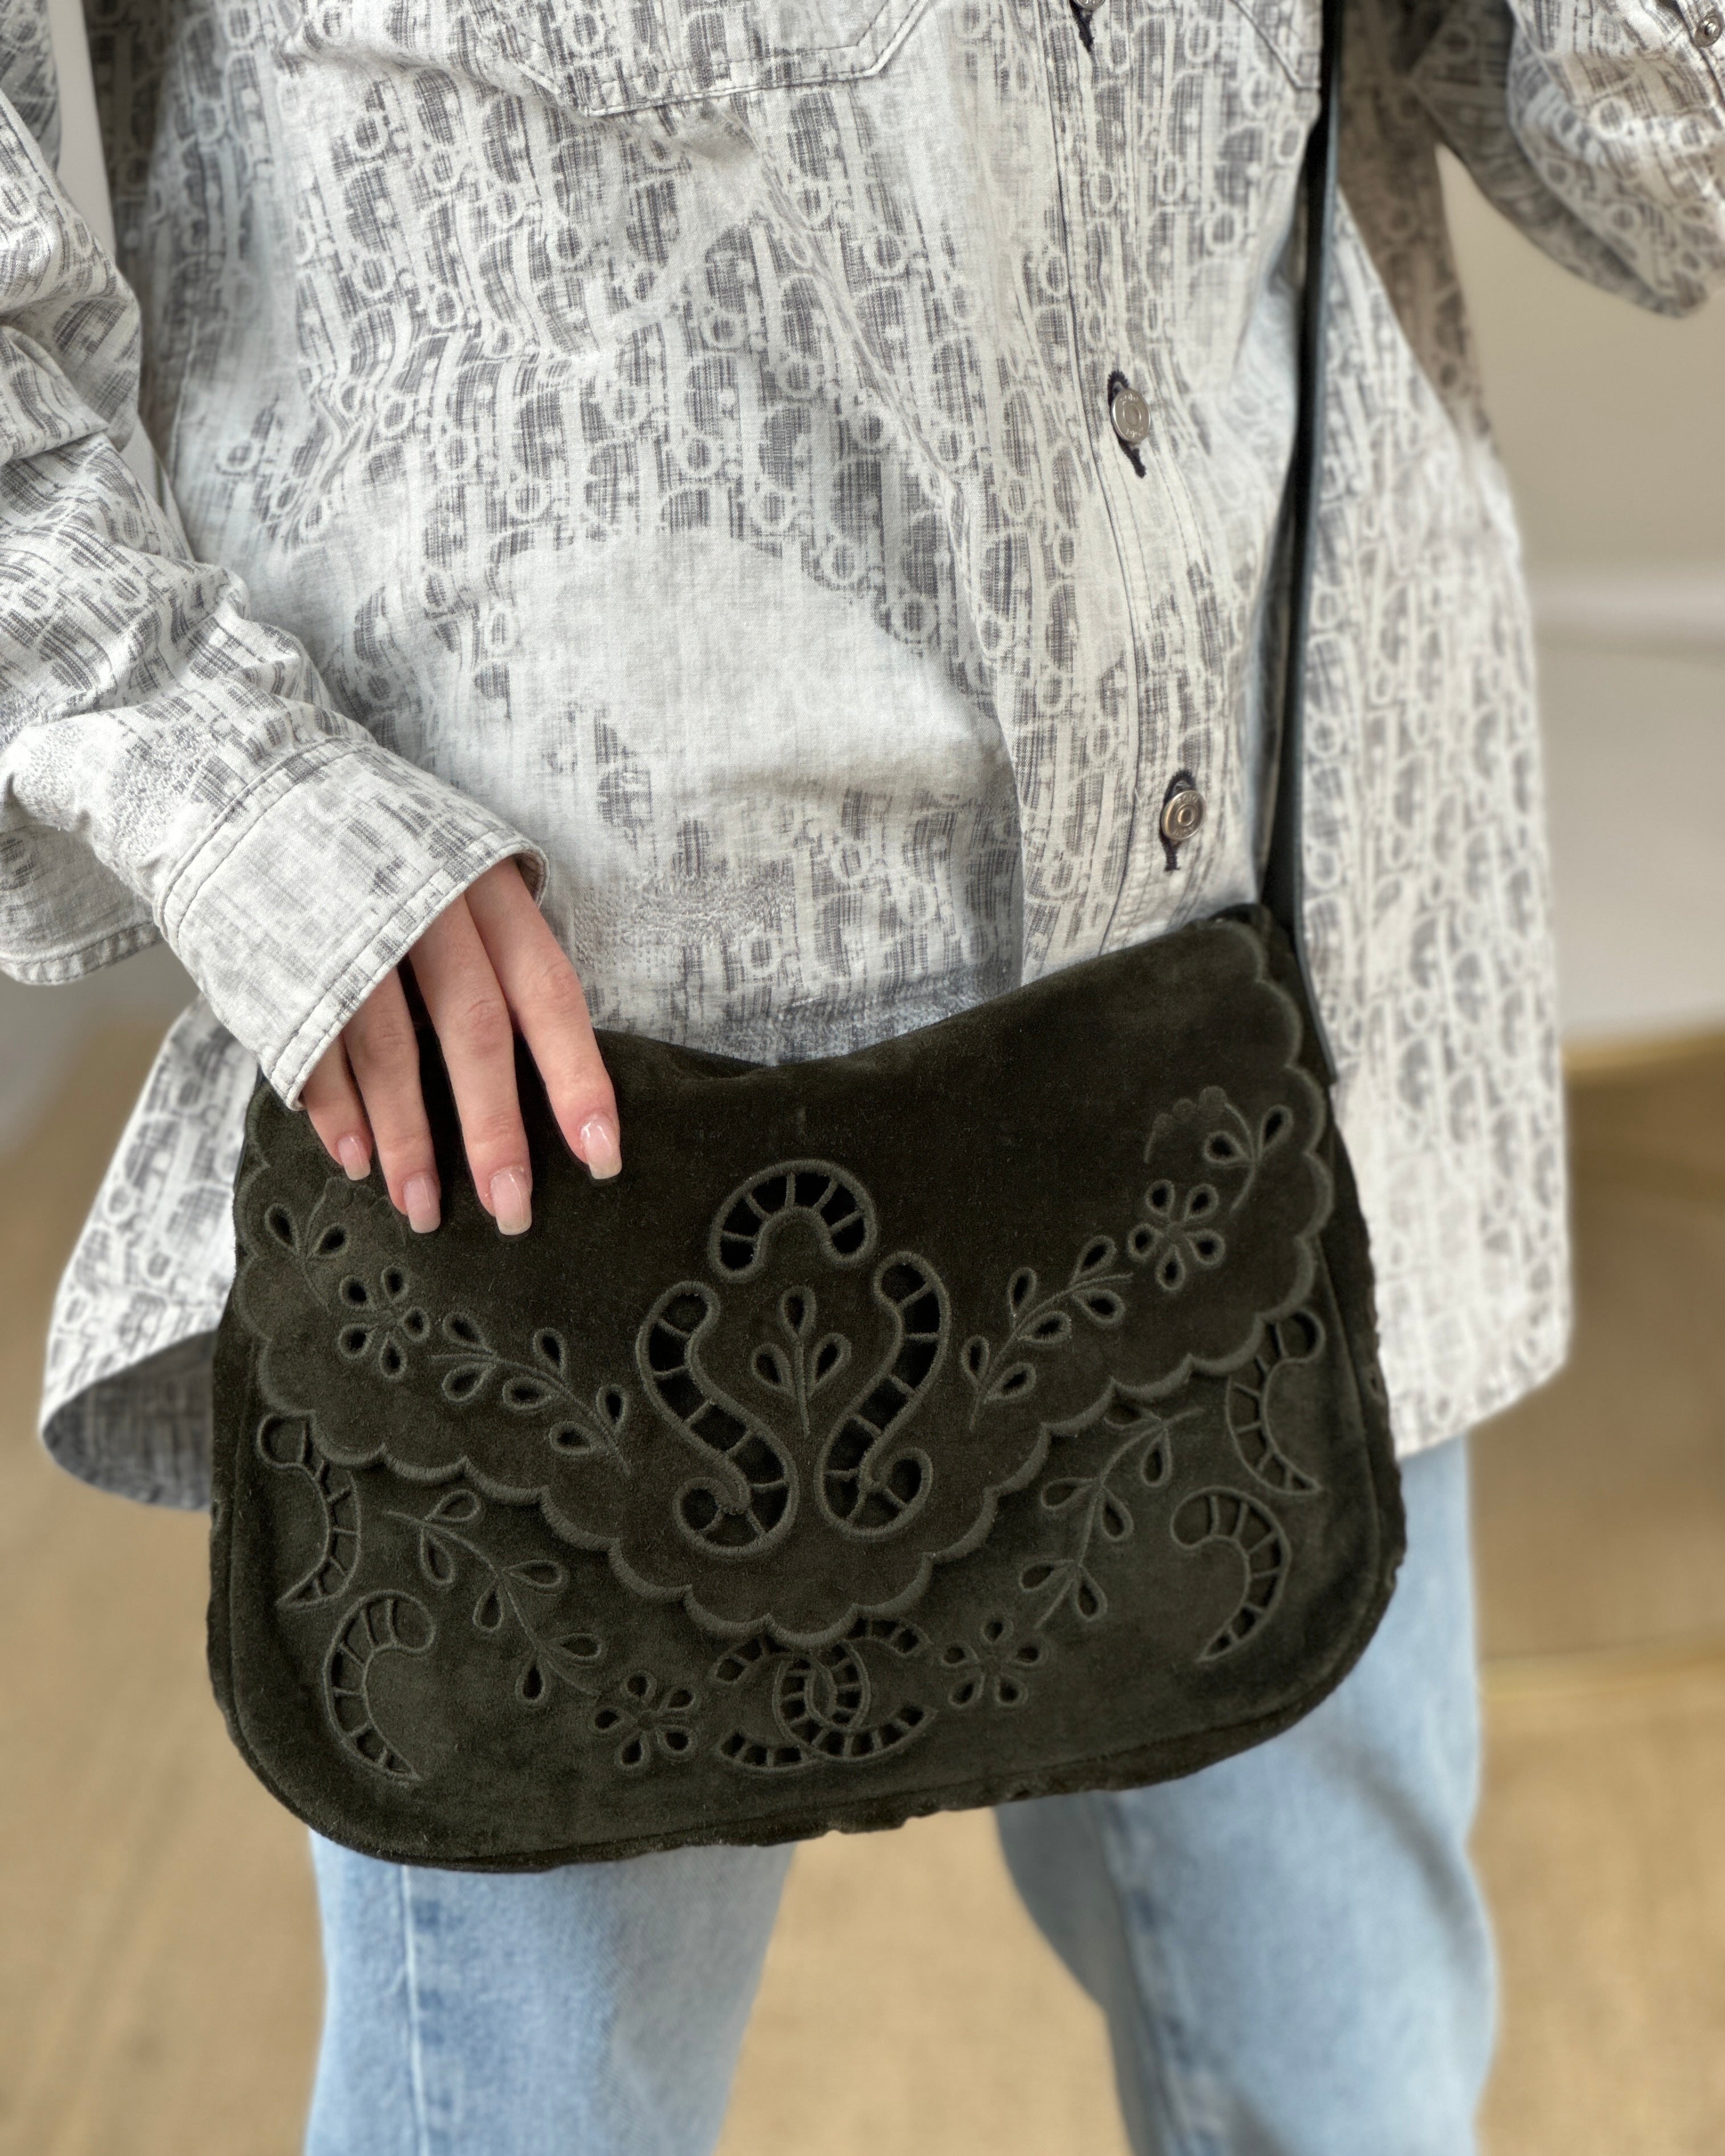 Chanel Khaki Suede Paisley Embroidered CC Messenger Bag with Ruthenium Hardware